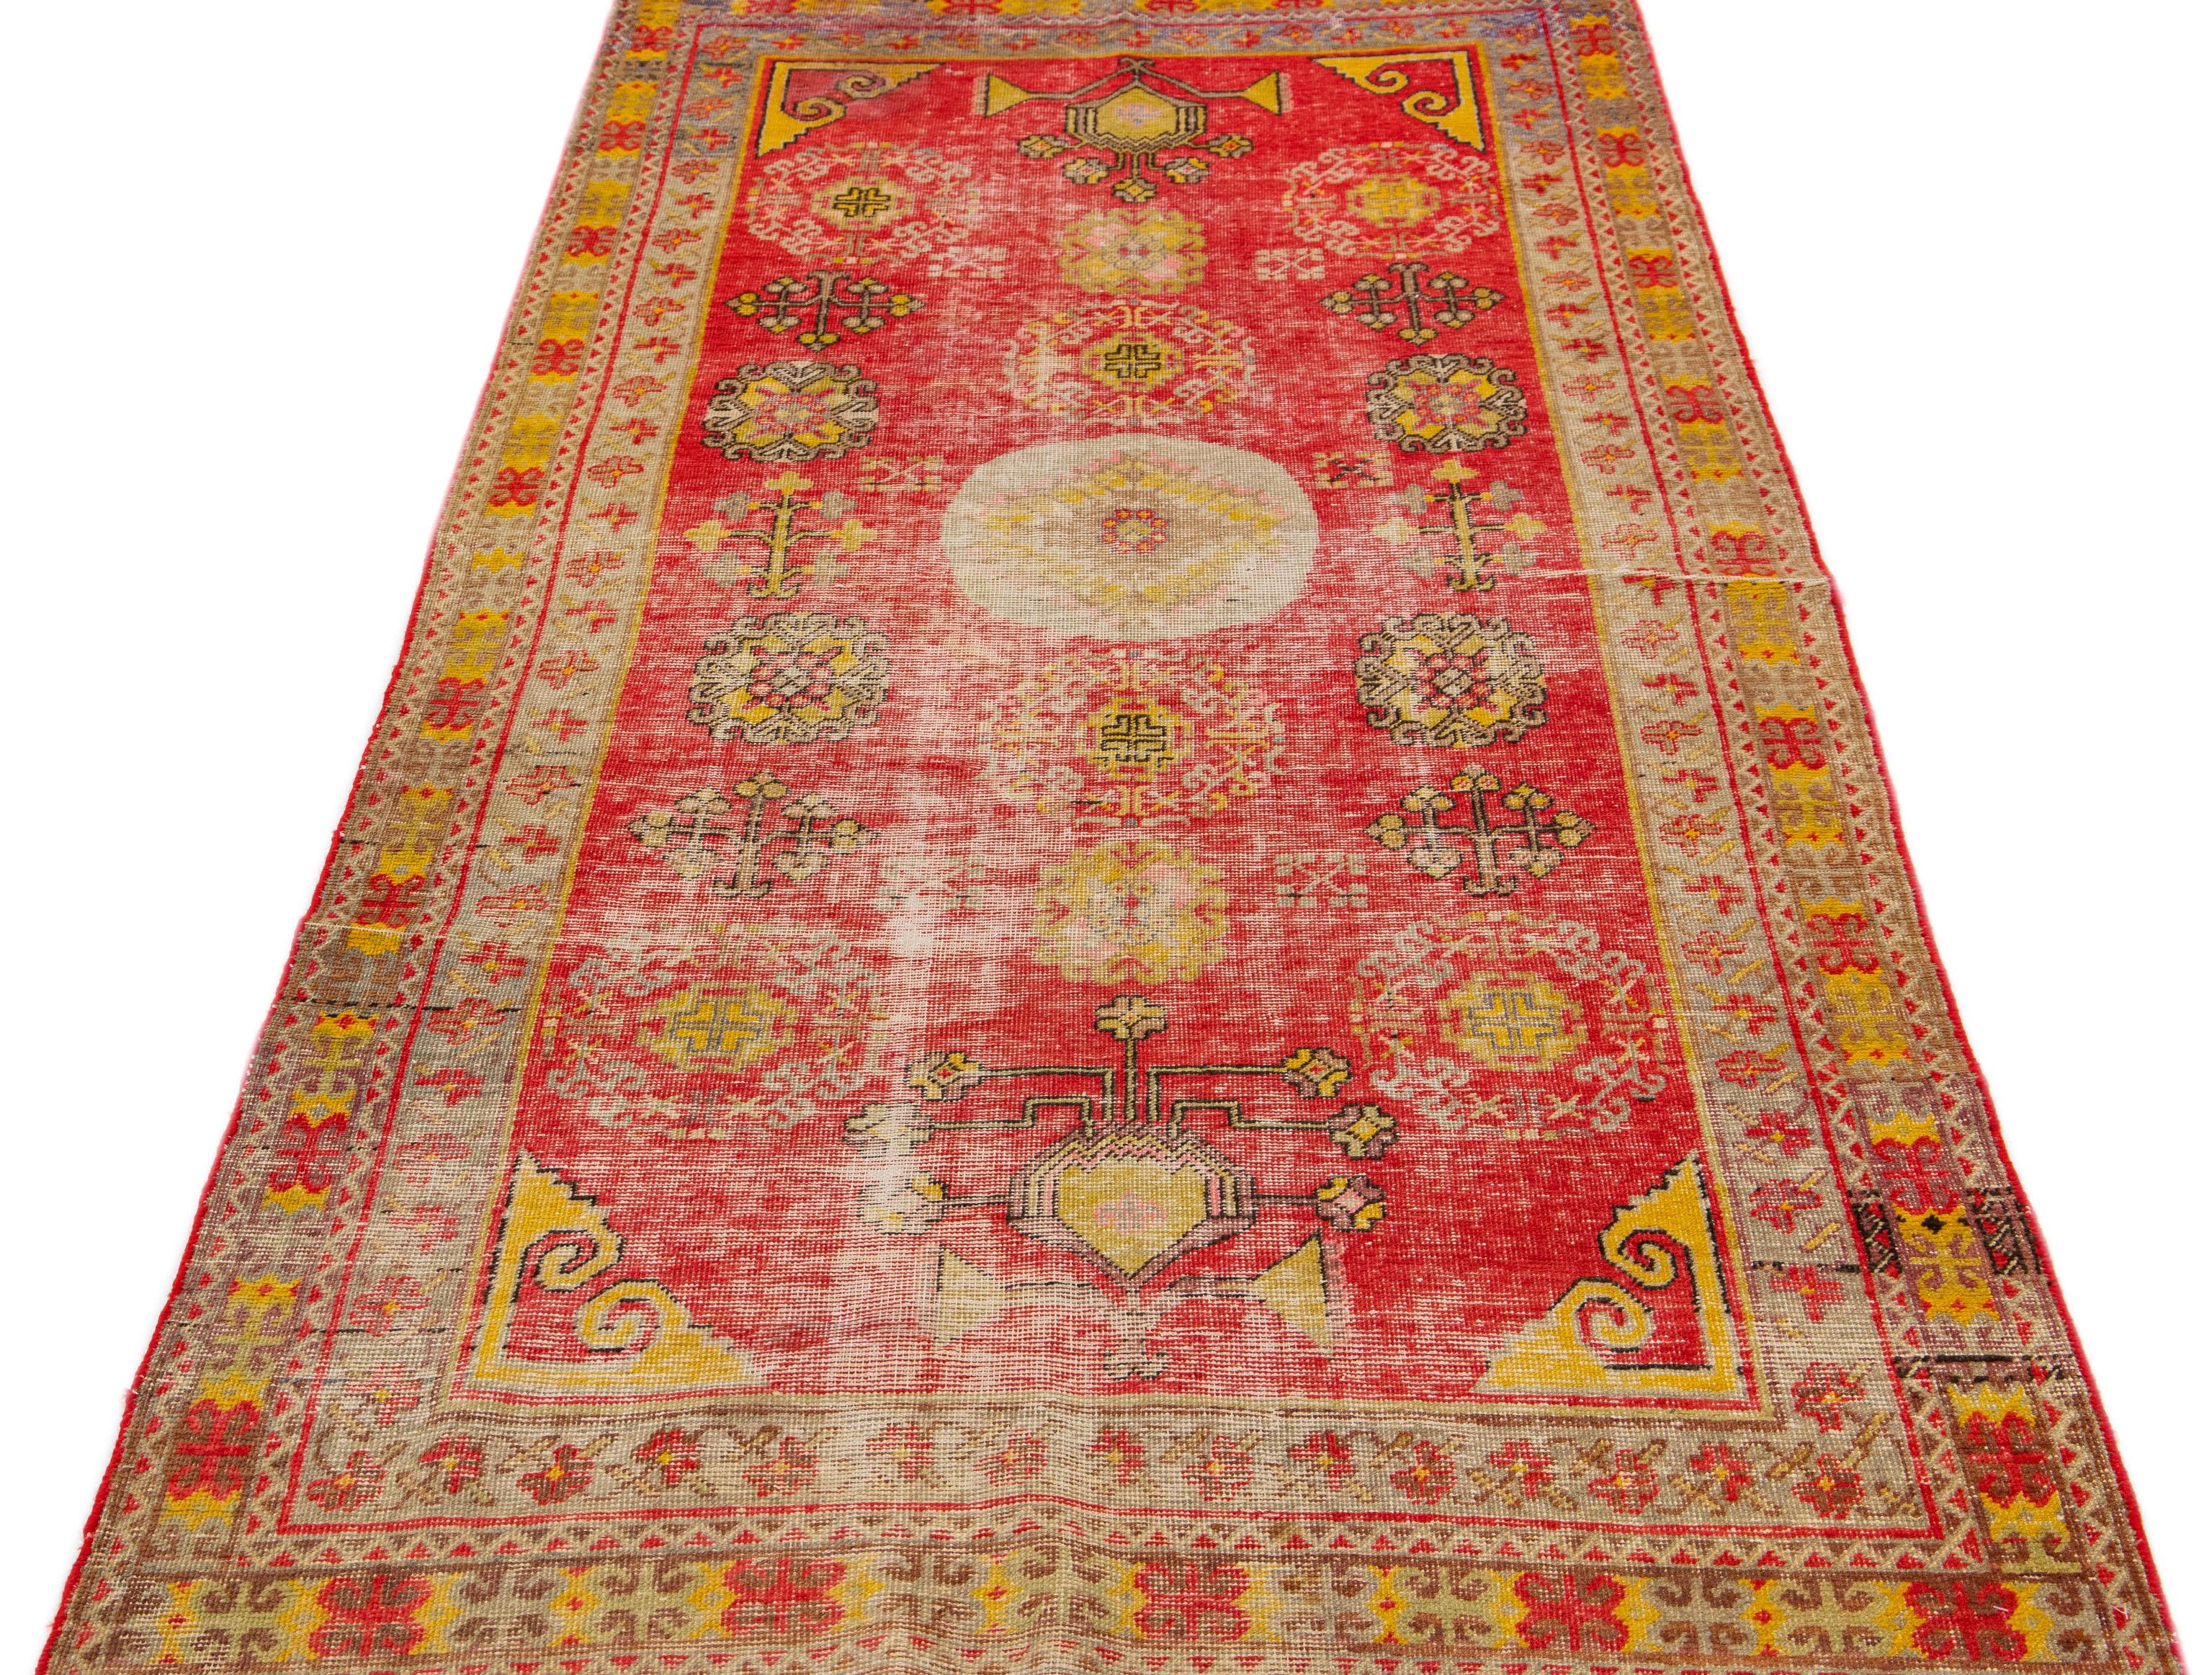 Beautiful Antique Turkish Khotan hand knotted wool runner with a red field. This Khotan runner has yellow, peach, and brown accents in a gorgeous all-over medallion floral motif design.

This runner measures 4'1